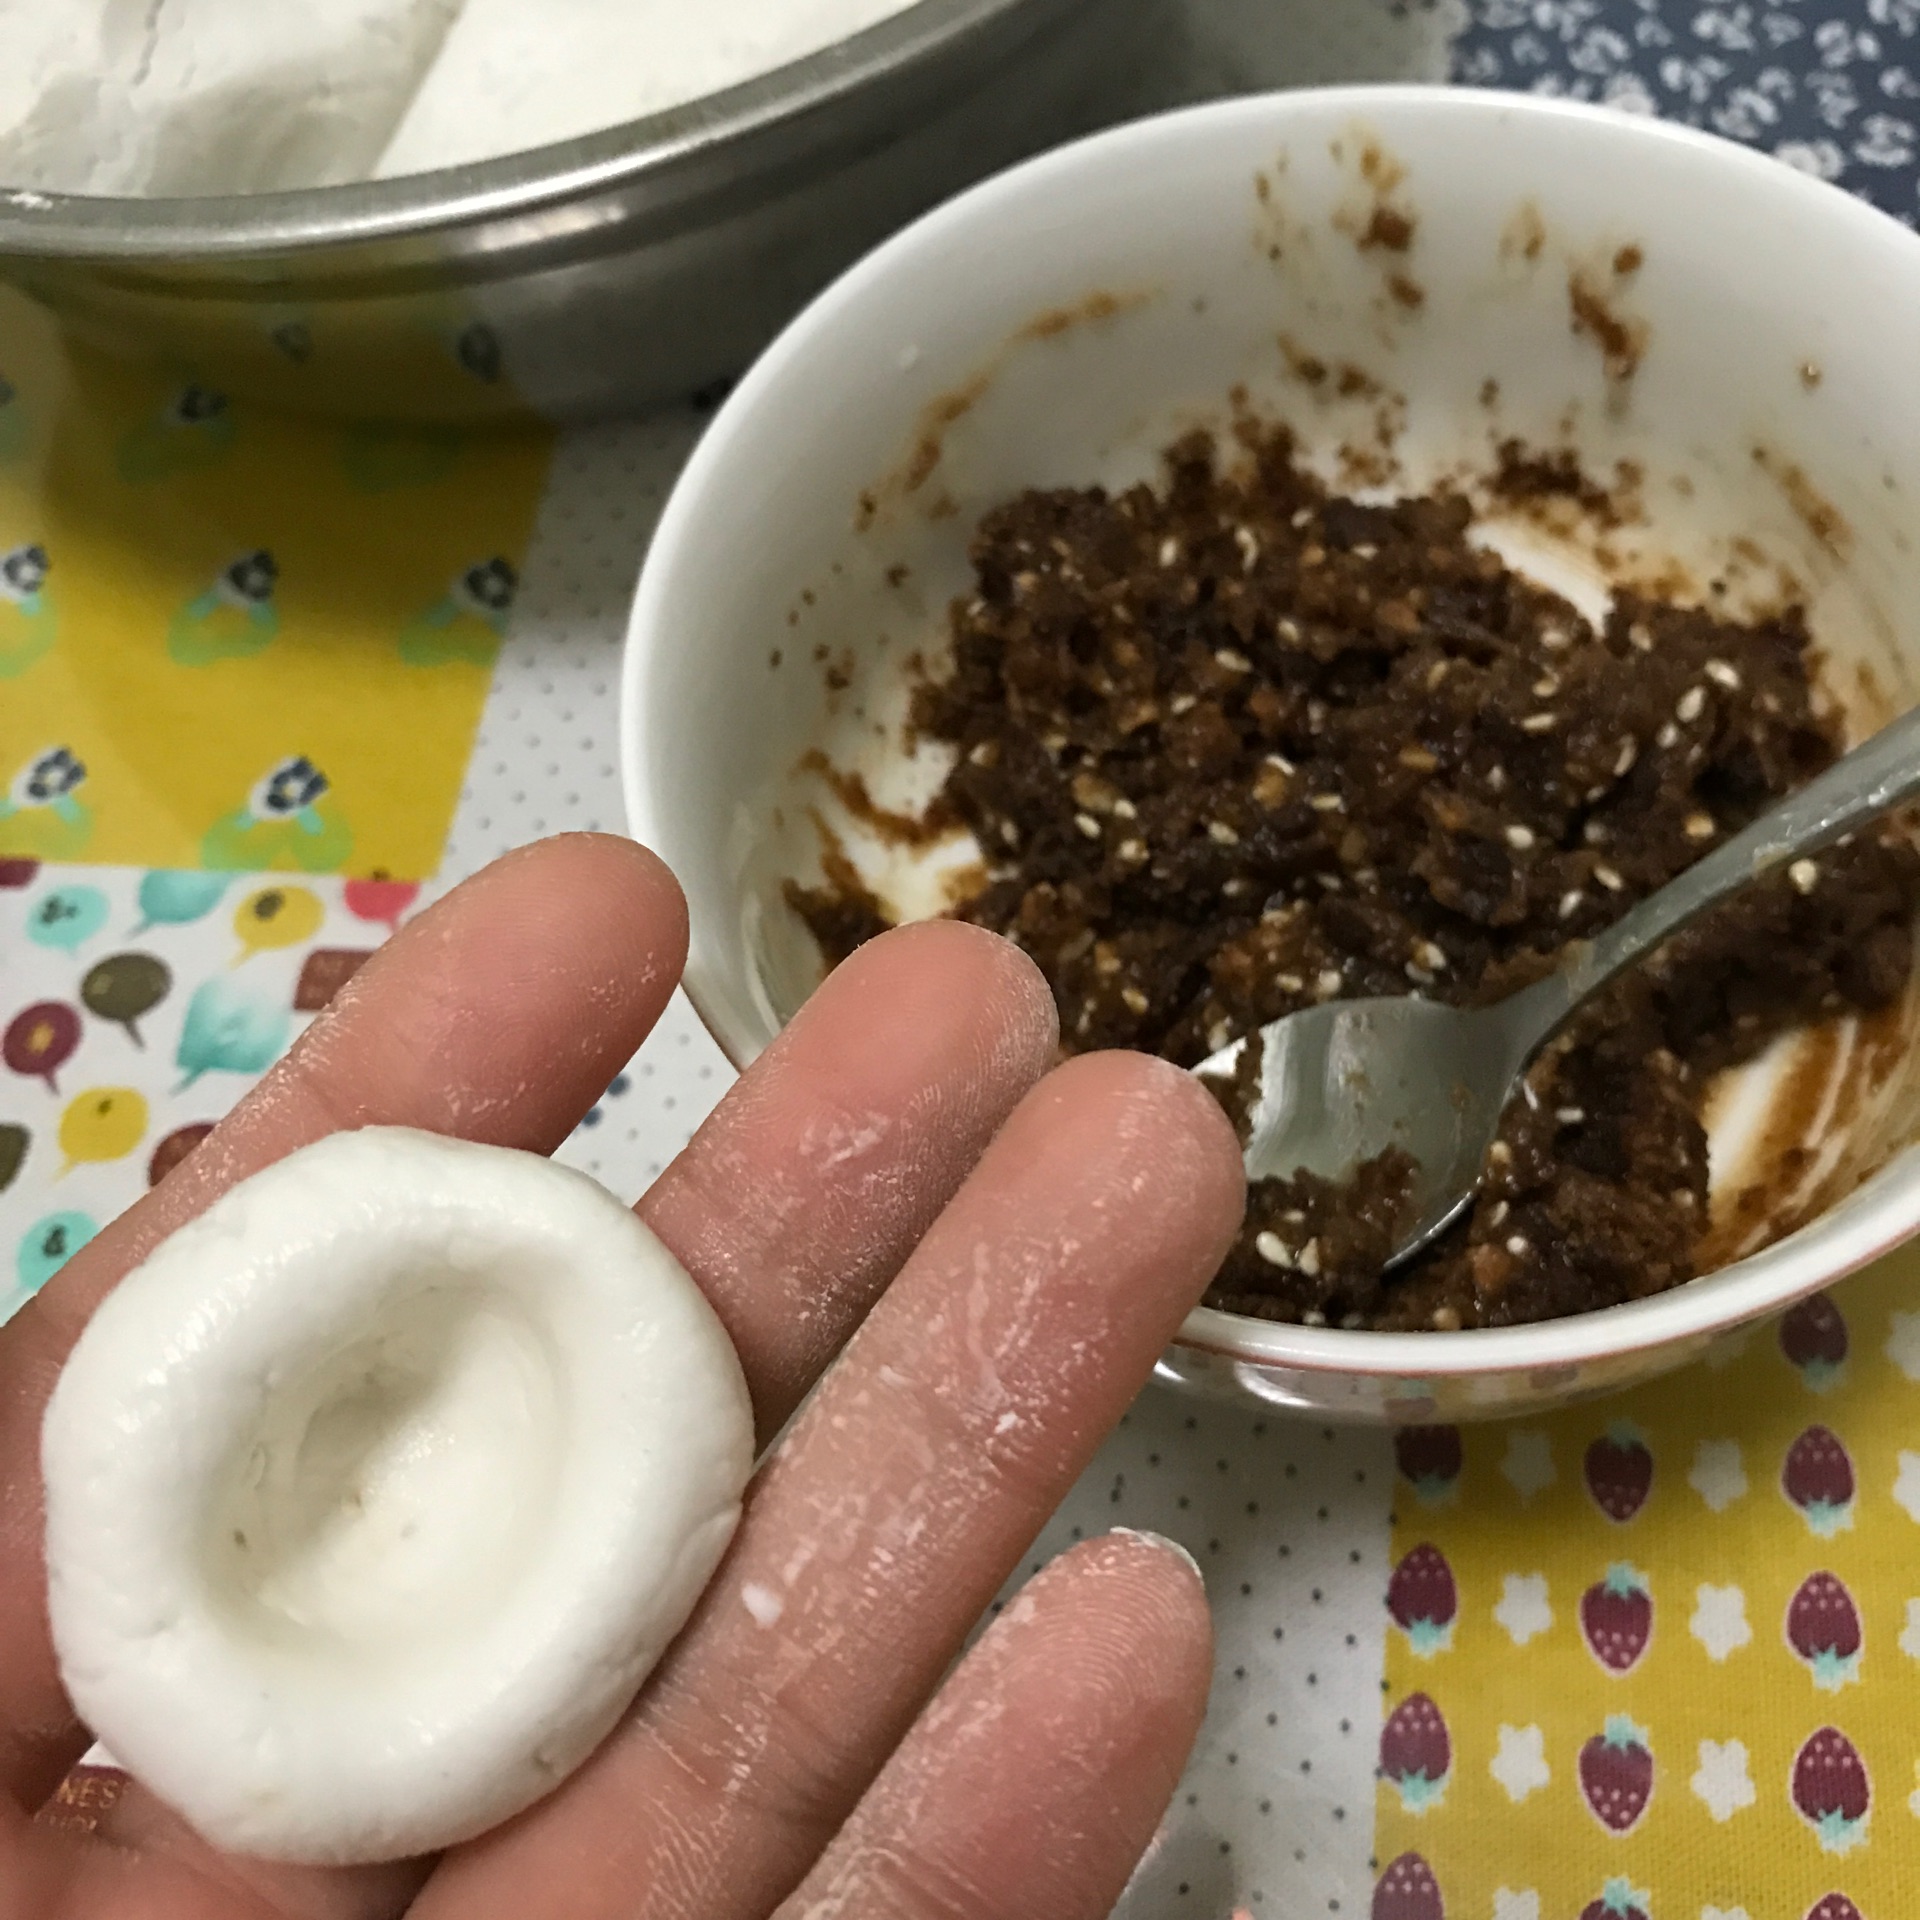 A taste of memories -- Echo's Kitchen: Tang Yuan in Ginger Syrup 红糖姜汁汤圆